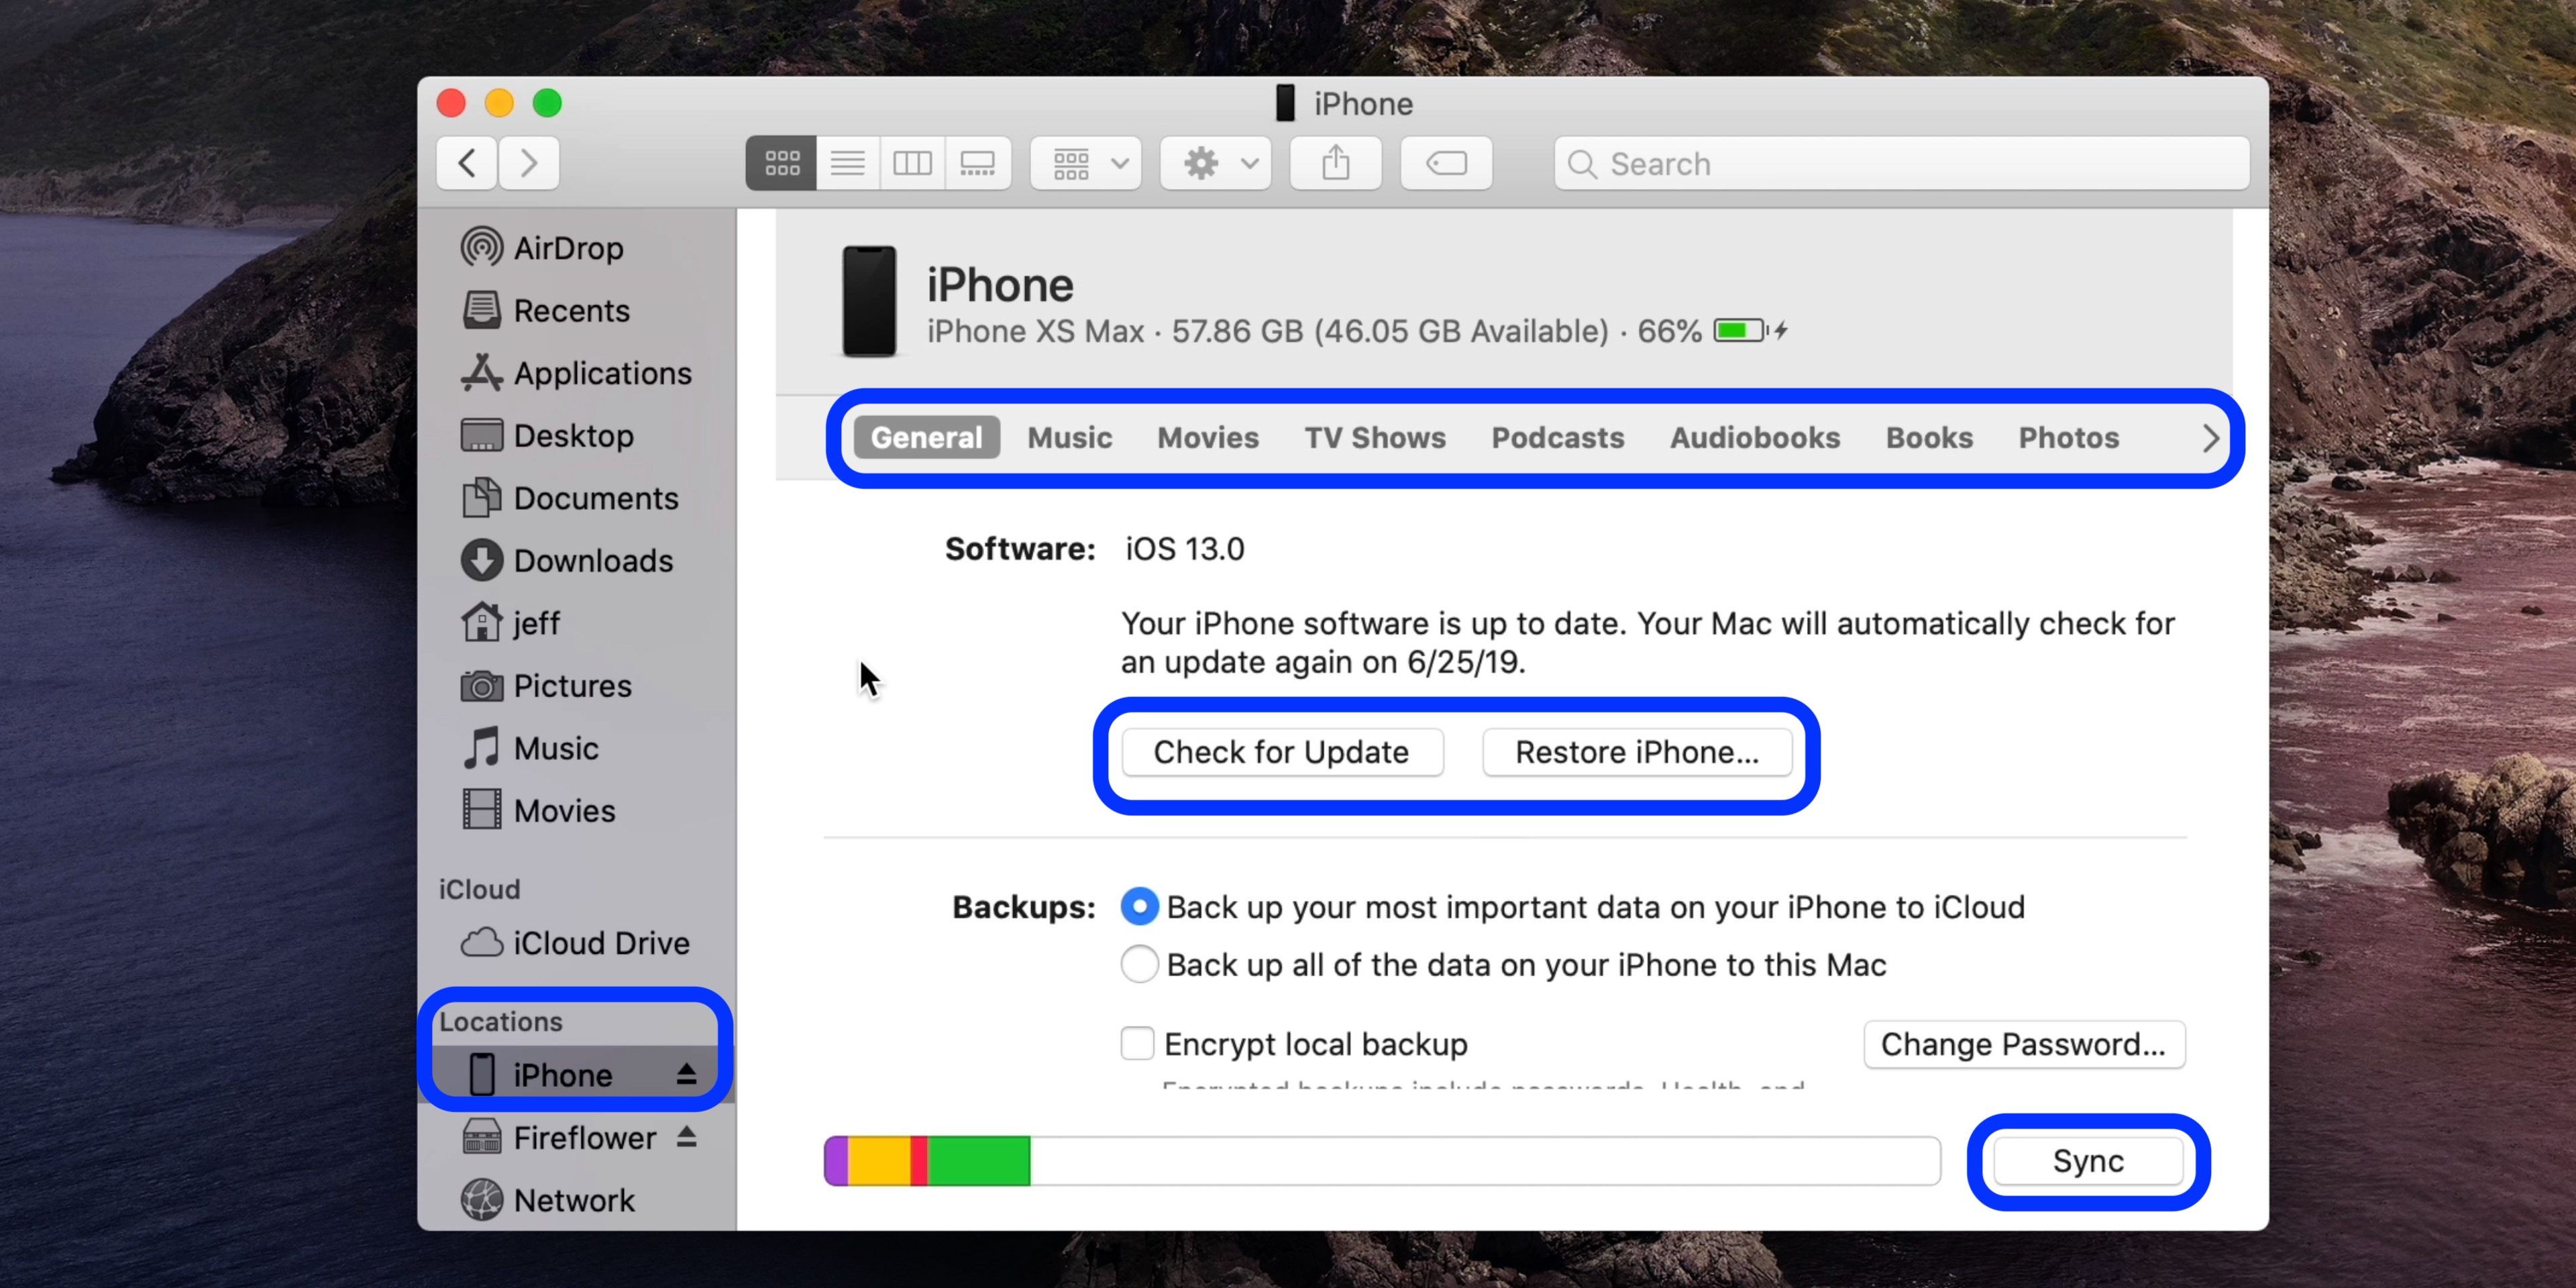 how to download photos from icloud to mac computer